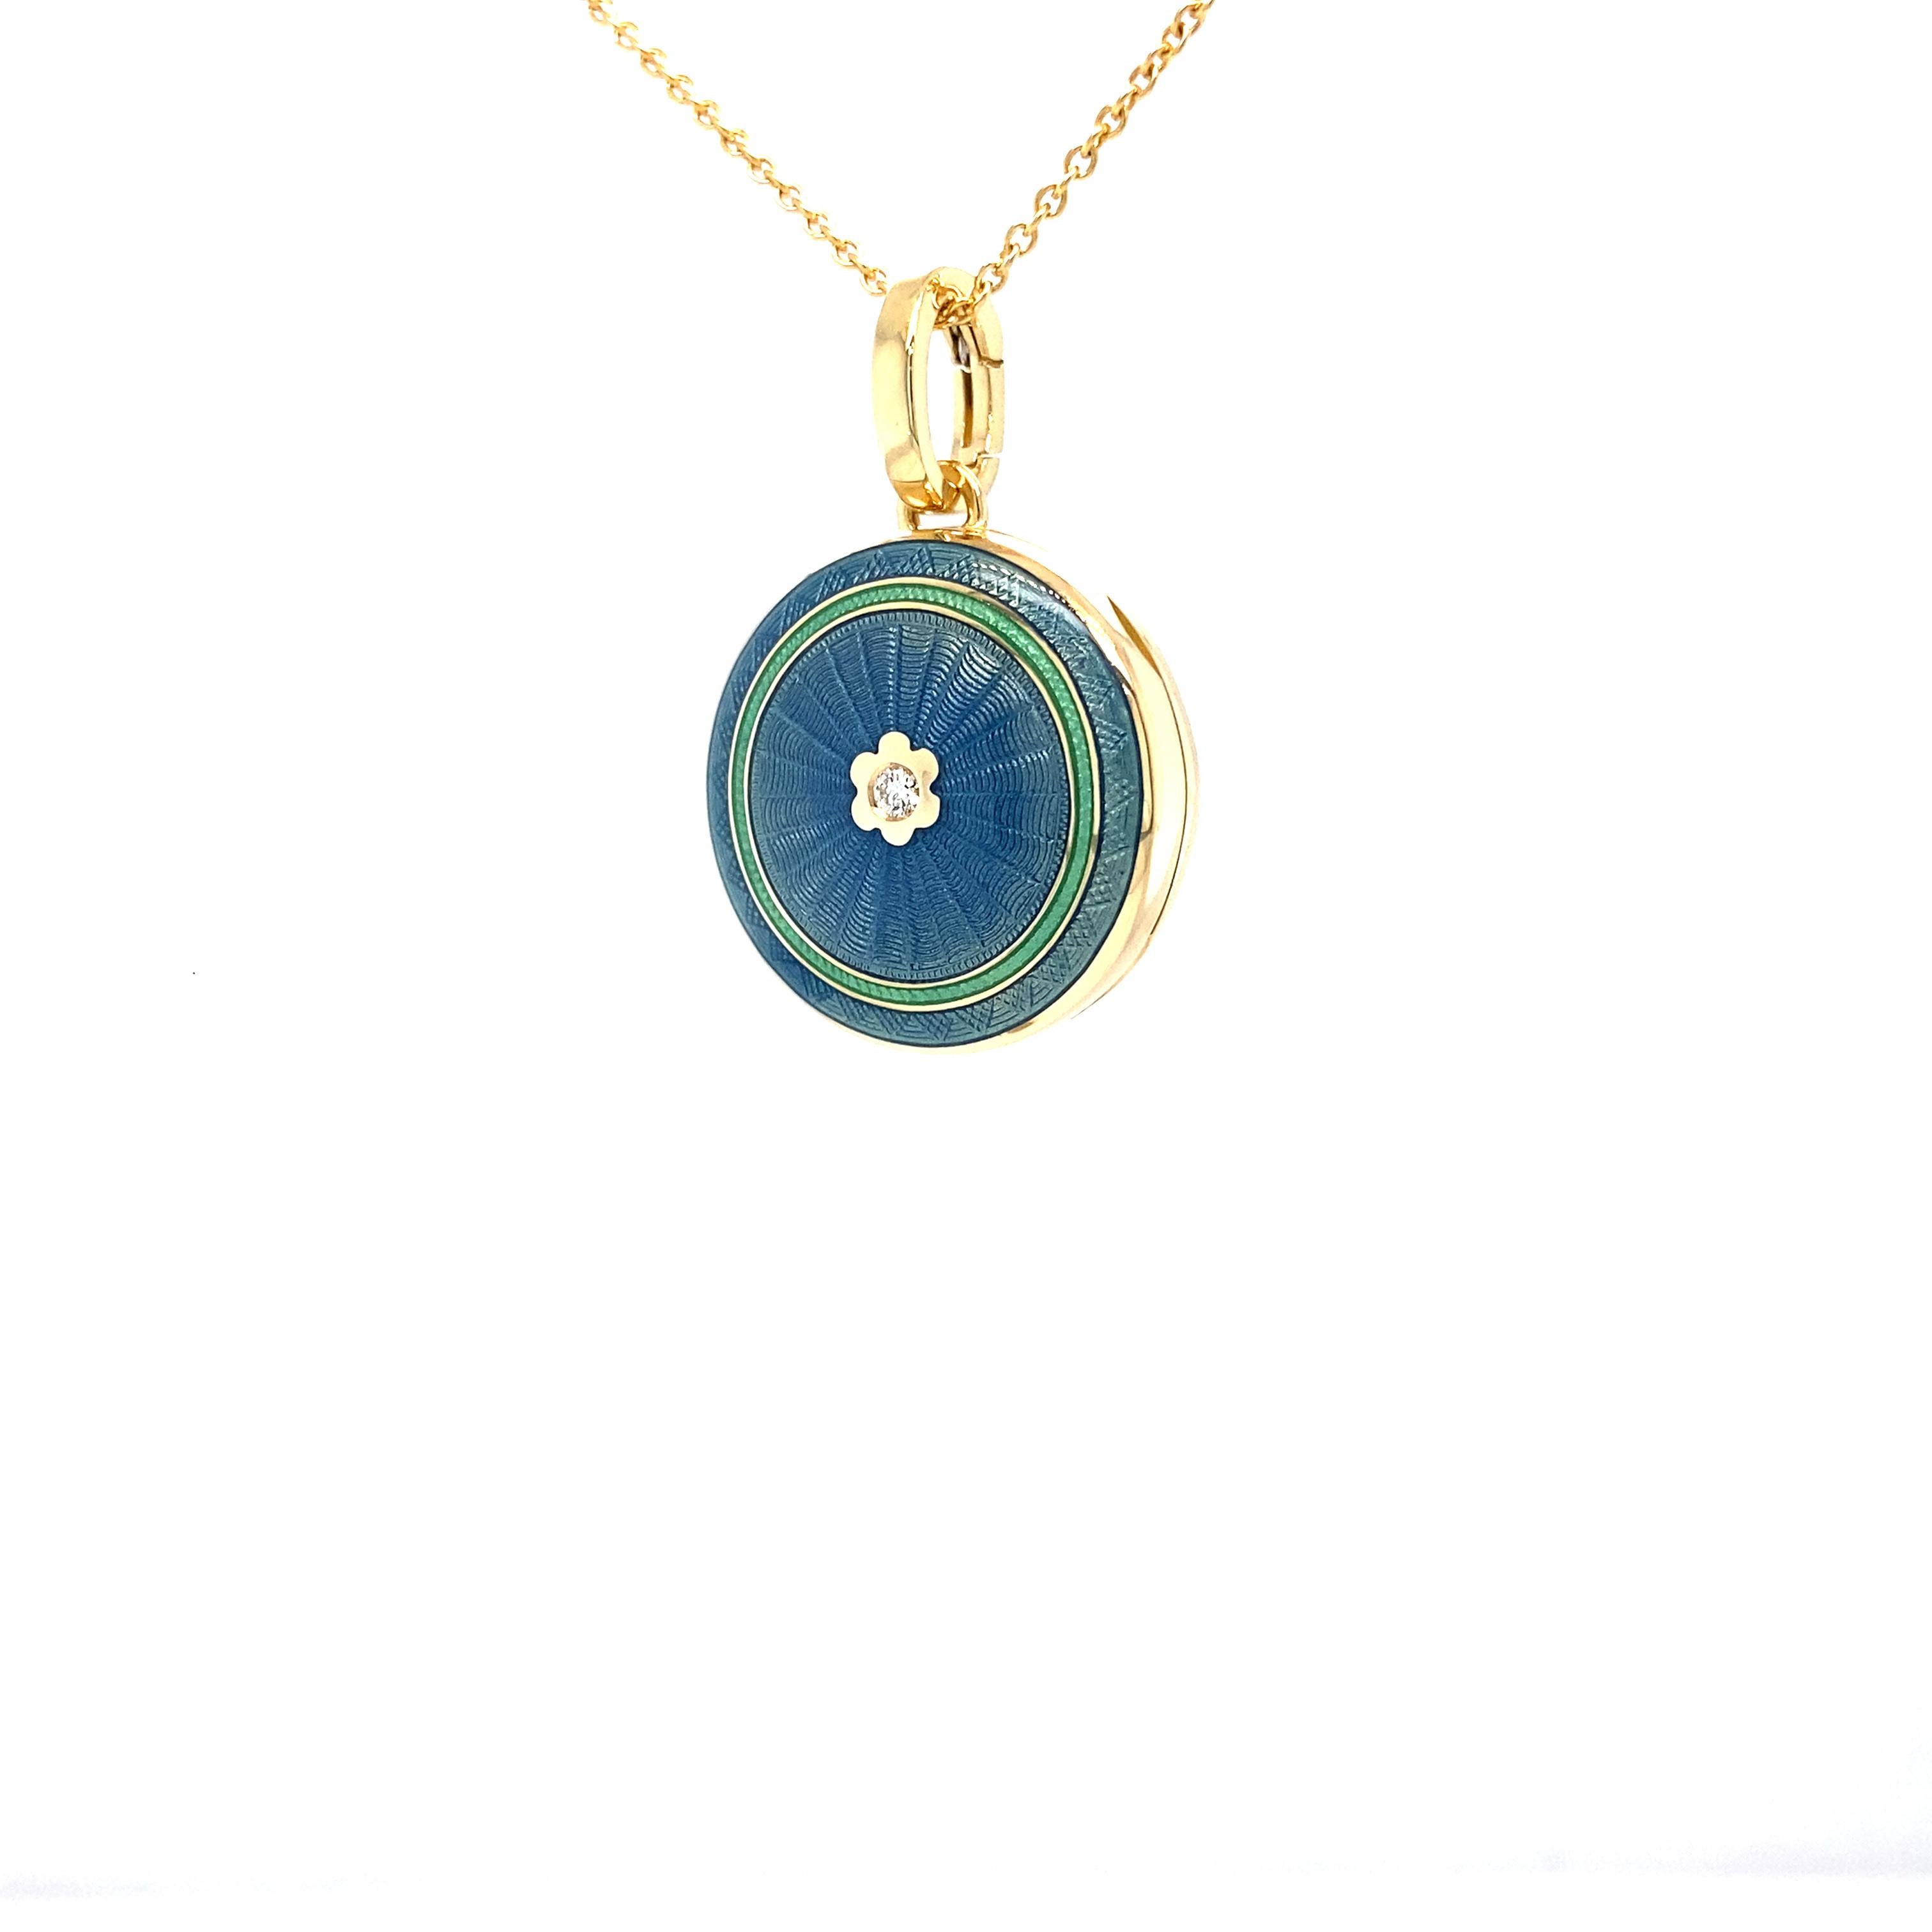 Victor Mayer round locket pendant 18k yellow gold, Hallmark collection, blue and turquoise vitreous enamel, guilloche,  1 diamond, total 0.03 ct, H VS, brilliant cut, diameter app. 21.0 mm

About the creator Victor Mayer 
Victor Mayer is